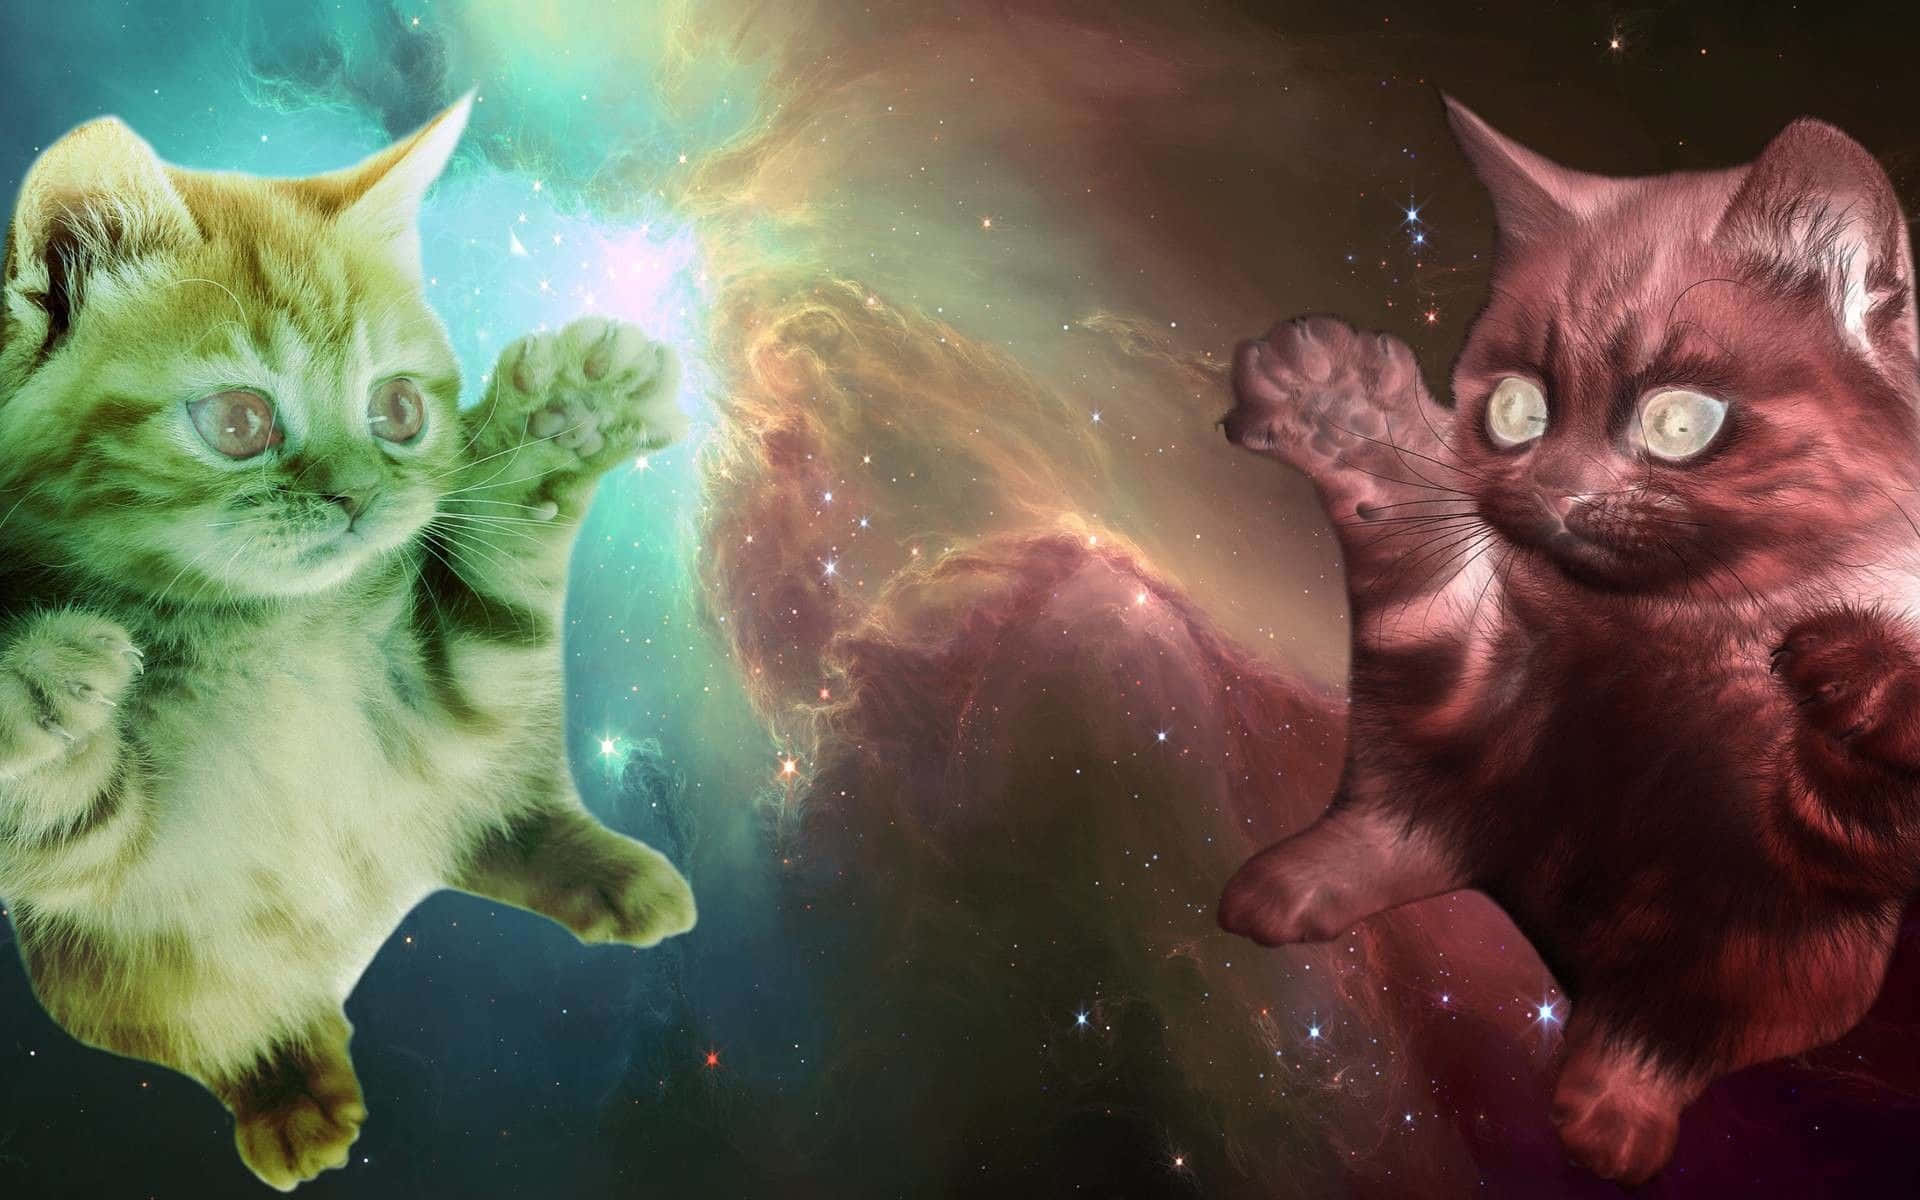 "Two cats explore the depths of the final frontier in search of new adventures". Wallpaper